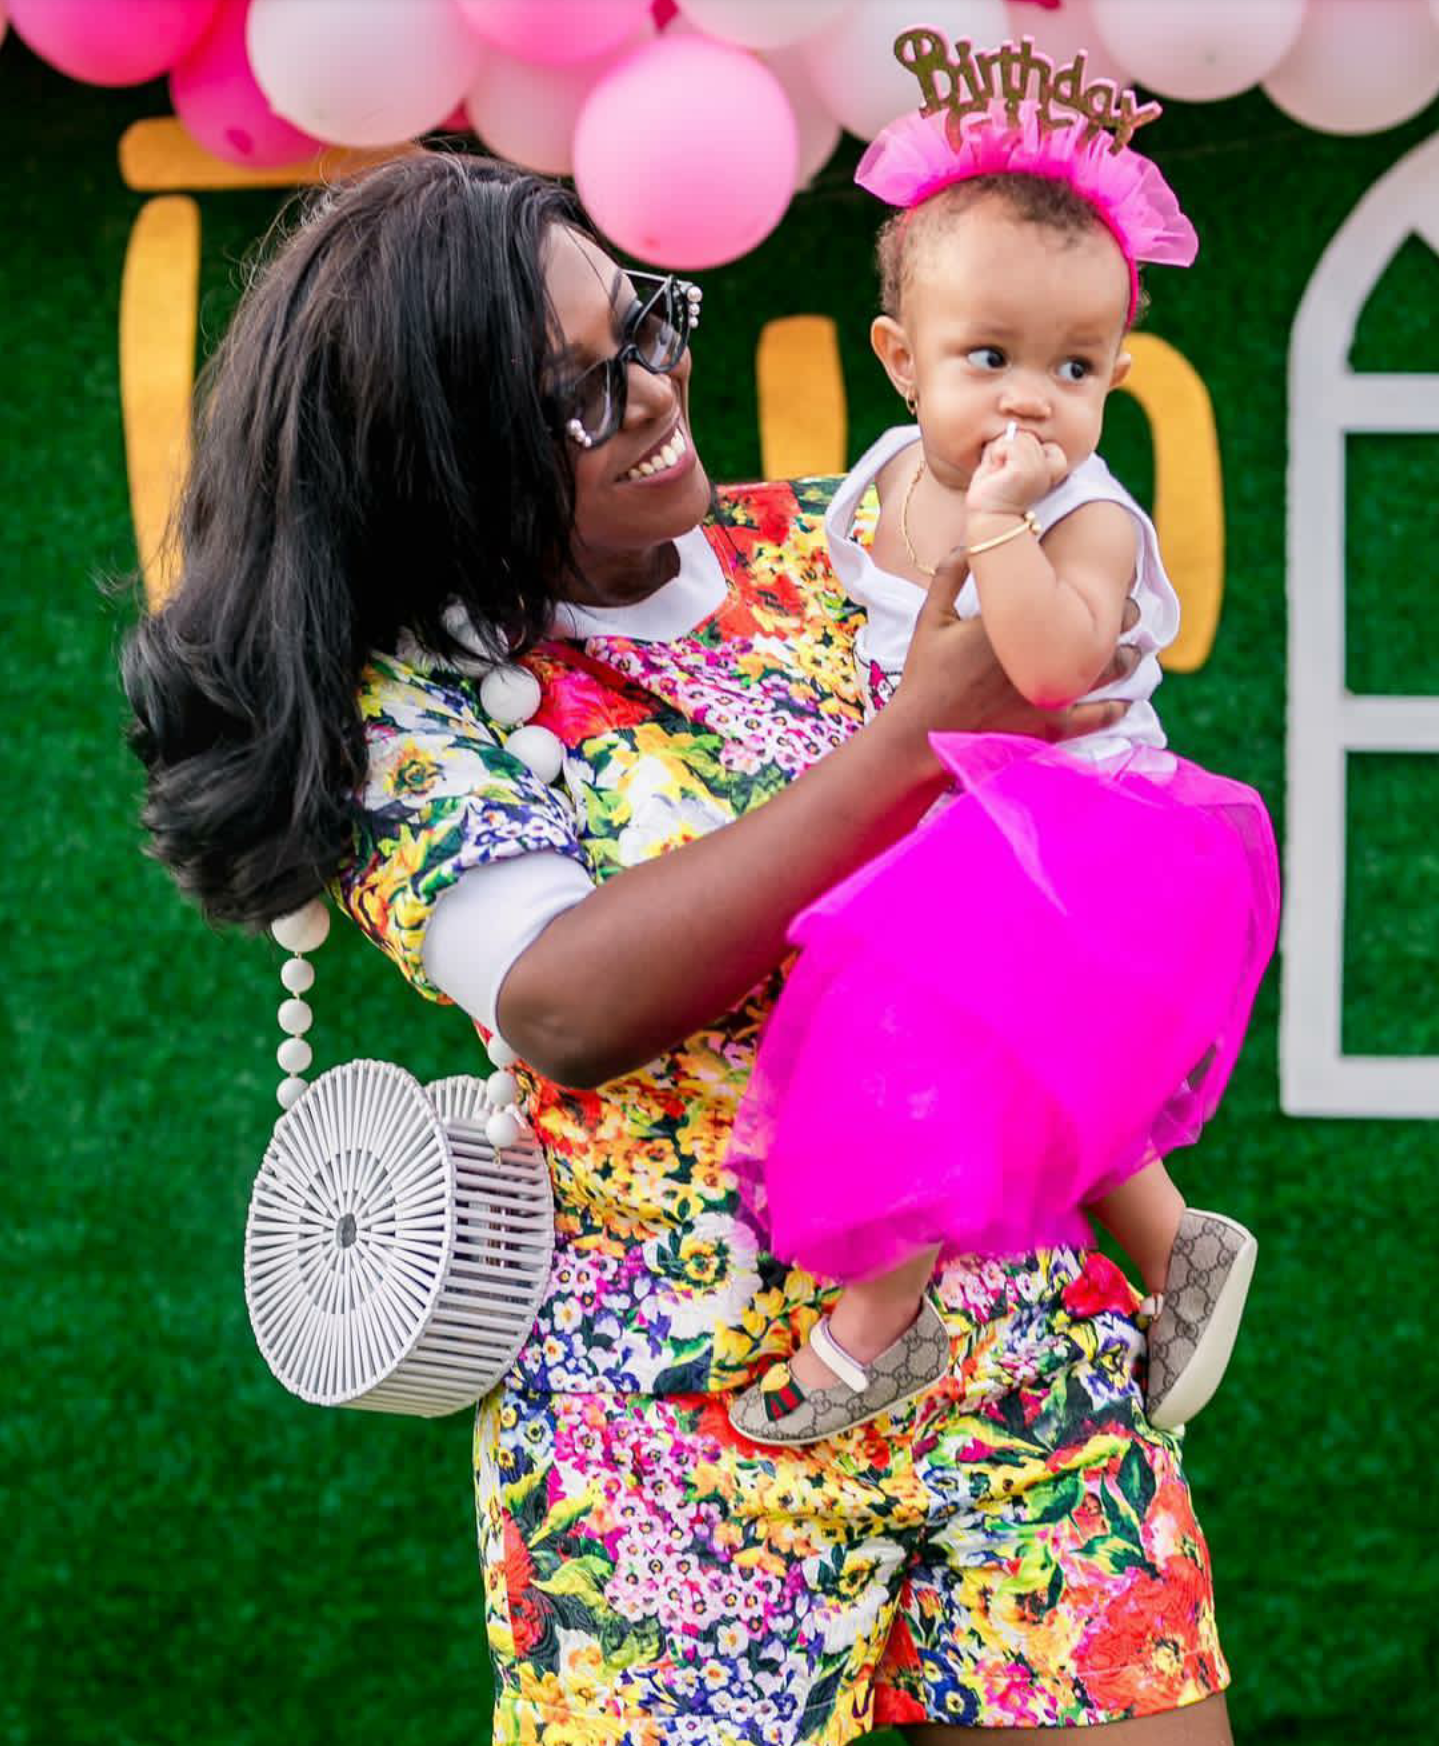 Yvonne Nelson's daughter's birthday party photos